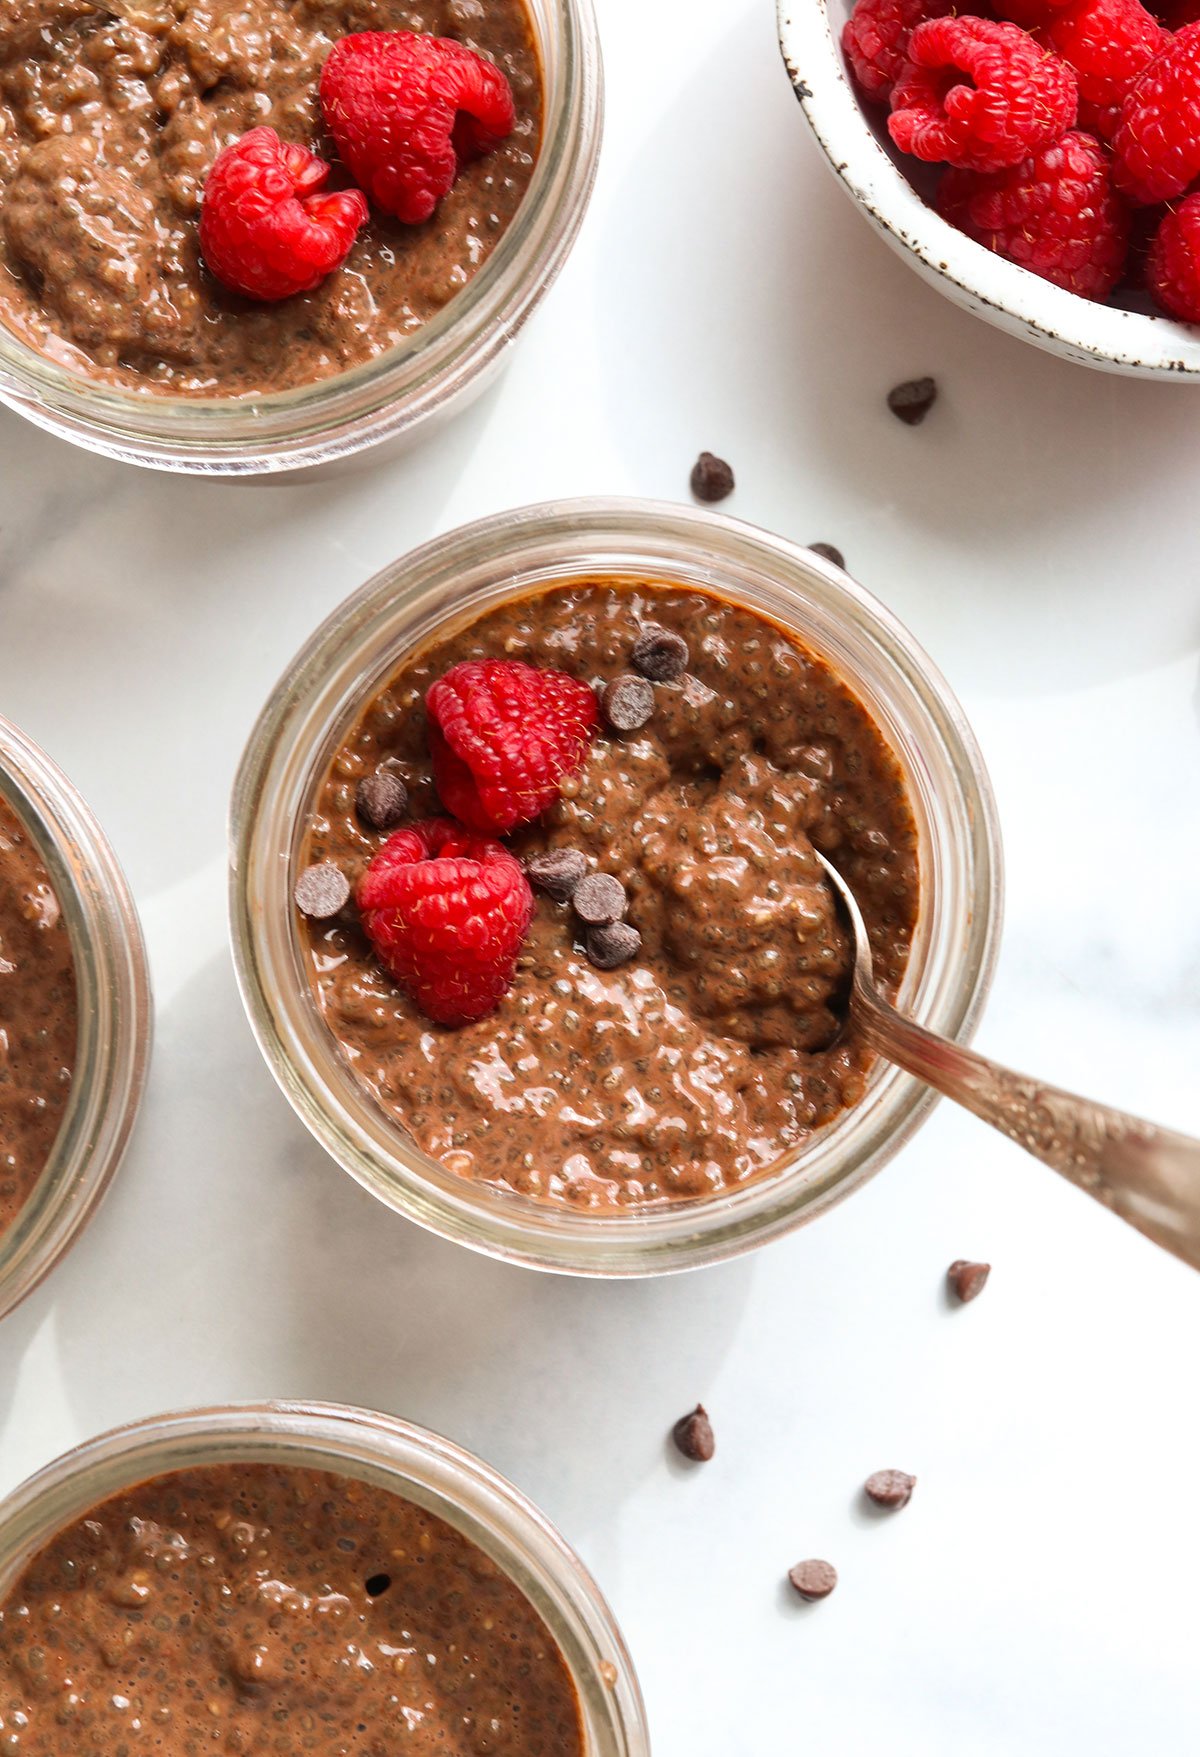 chocolate chia pudding topped with raspberries and chocolate chips.